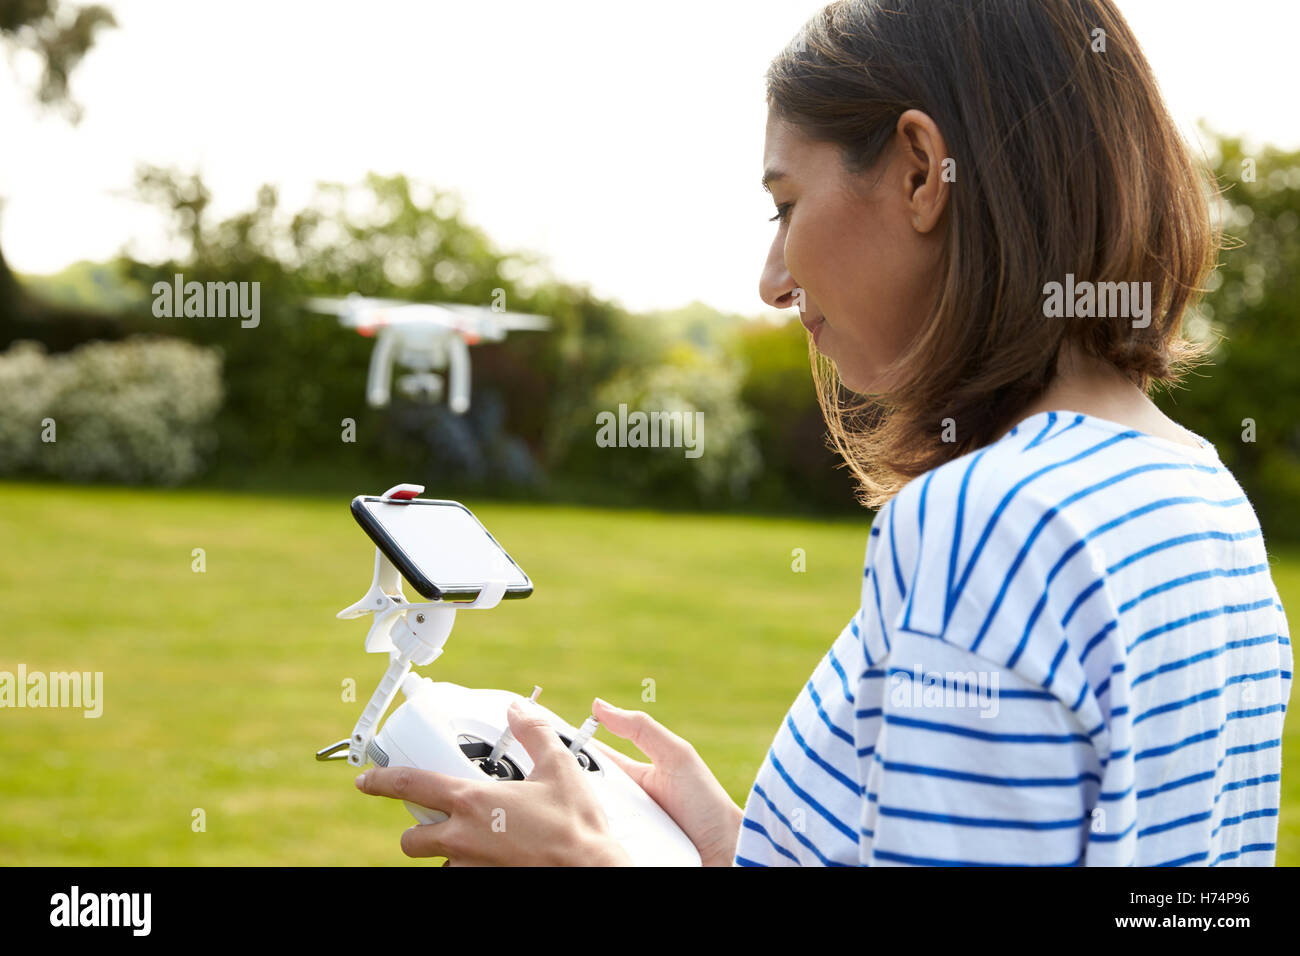 Woman Flying Drone Quadcopter In Garden Stock Photo